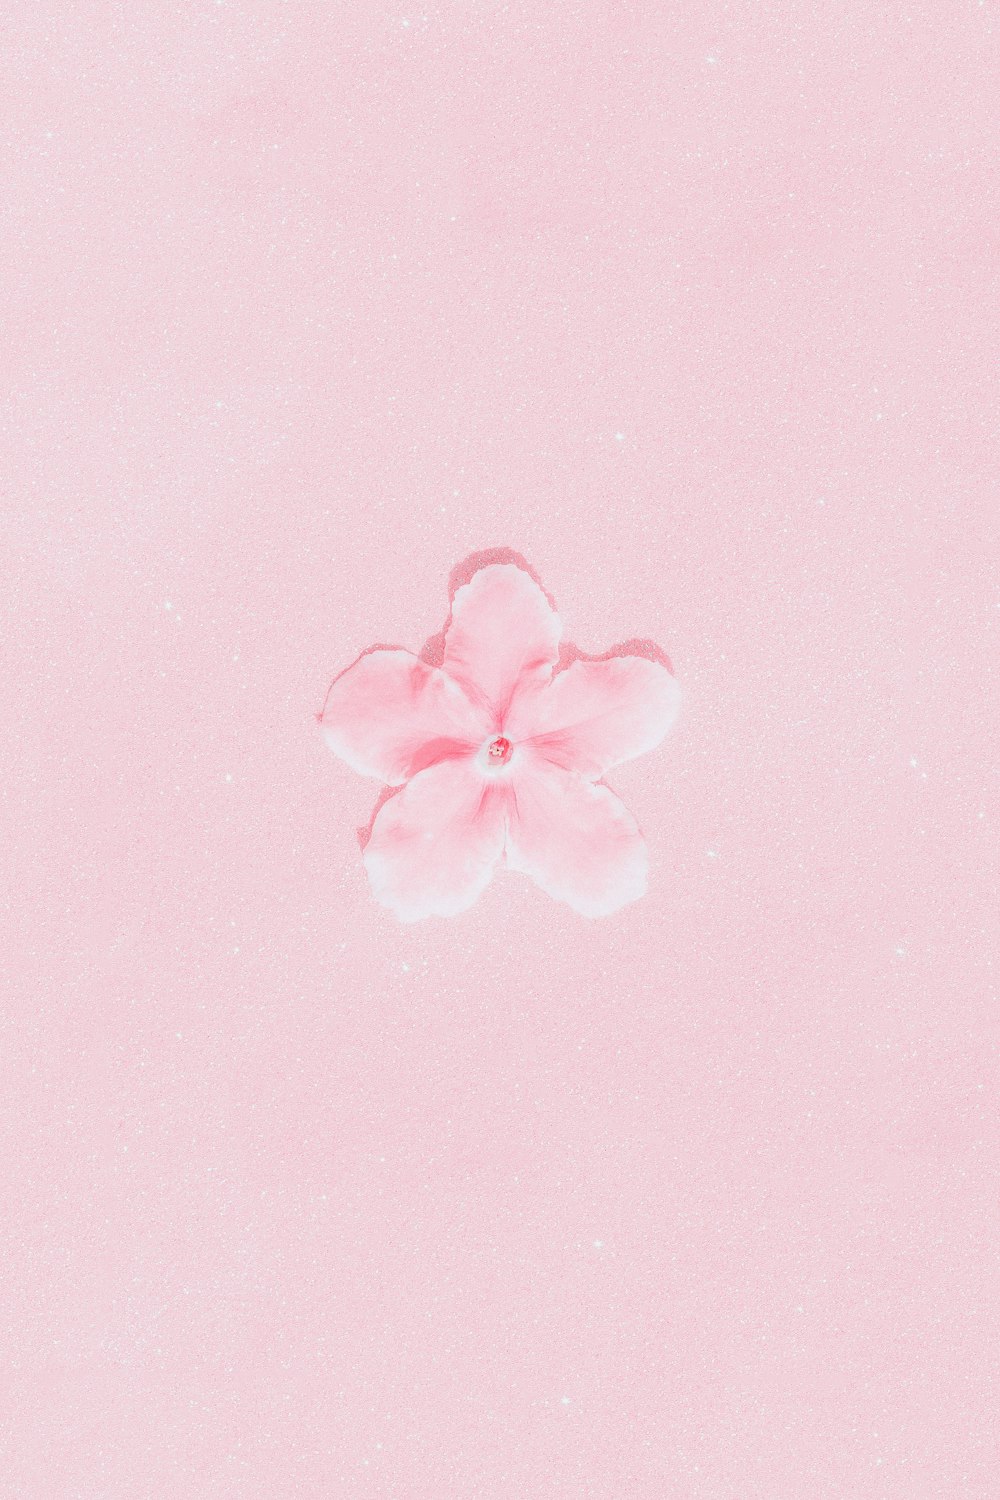 a pink flower on a pink background